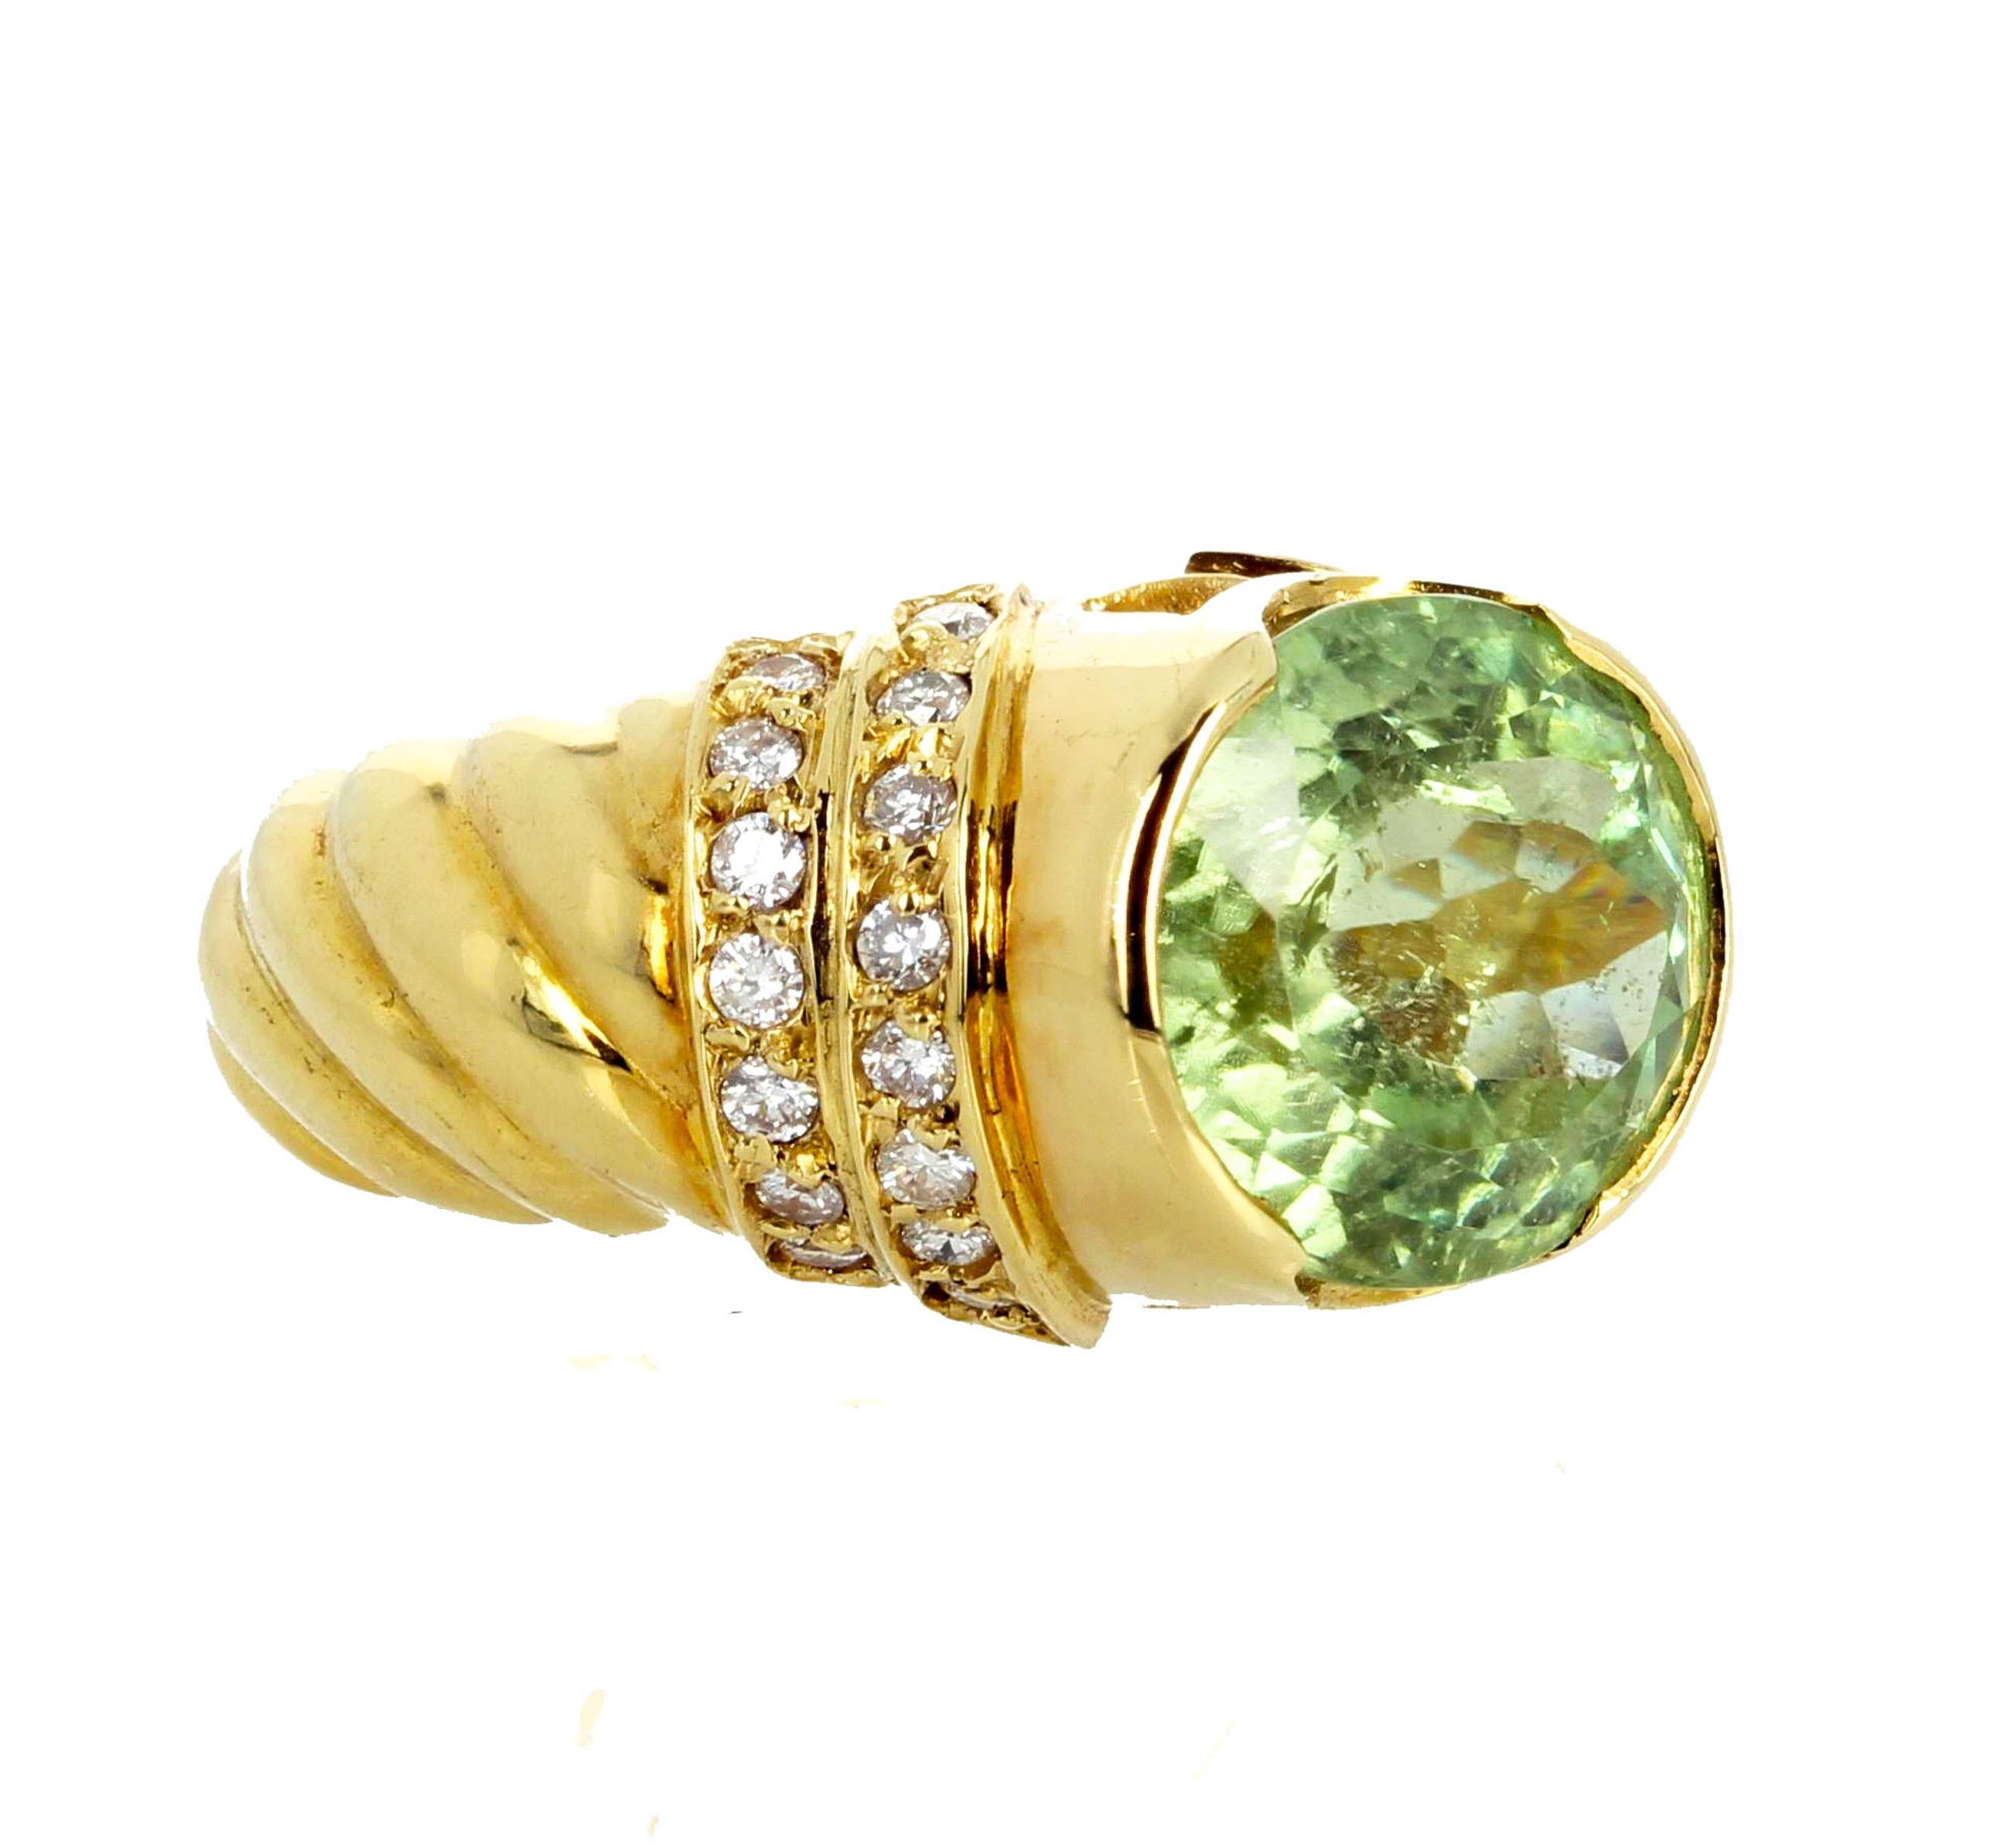 Gorgeous sparkling 8 carat natural translucent Green Tourmaline in this beautiful 18Kt yellow gold ring set with sparkling real little white Diamonds.  There are no eye visible inclusions.  This is a size 7 (sizable). 